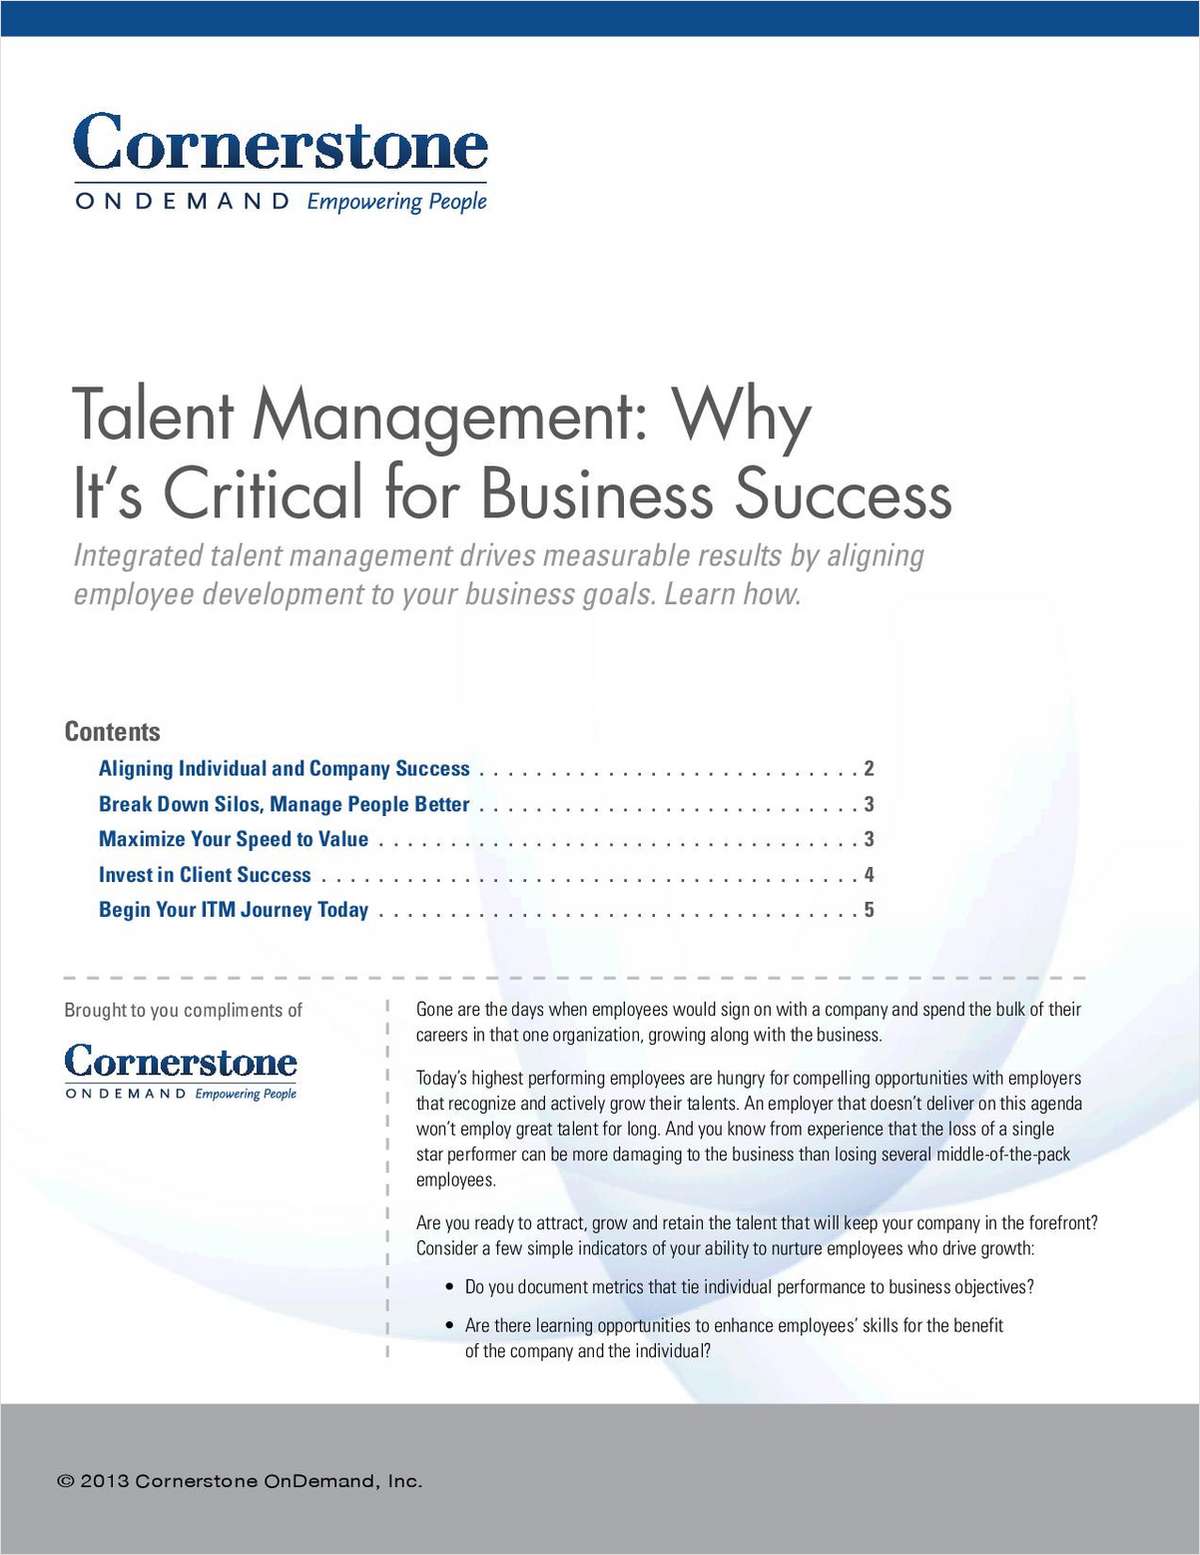 Talent Management: Why It's Critical for Business Success